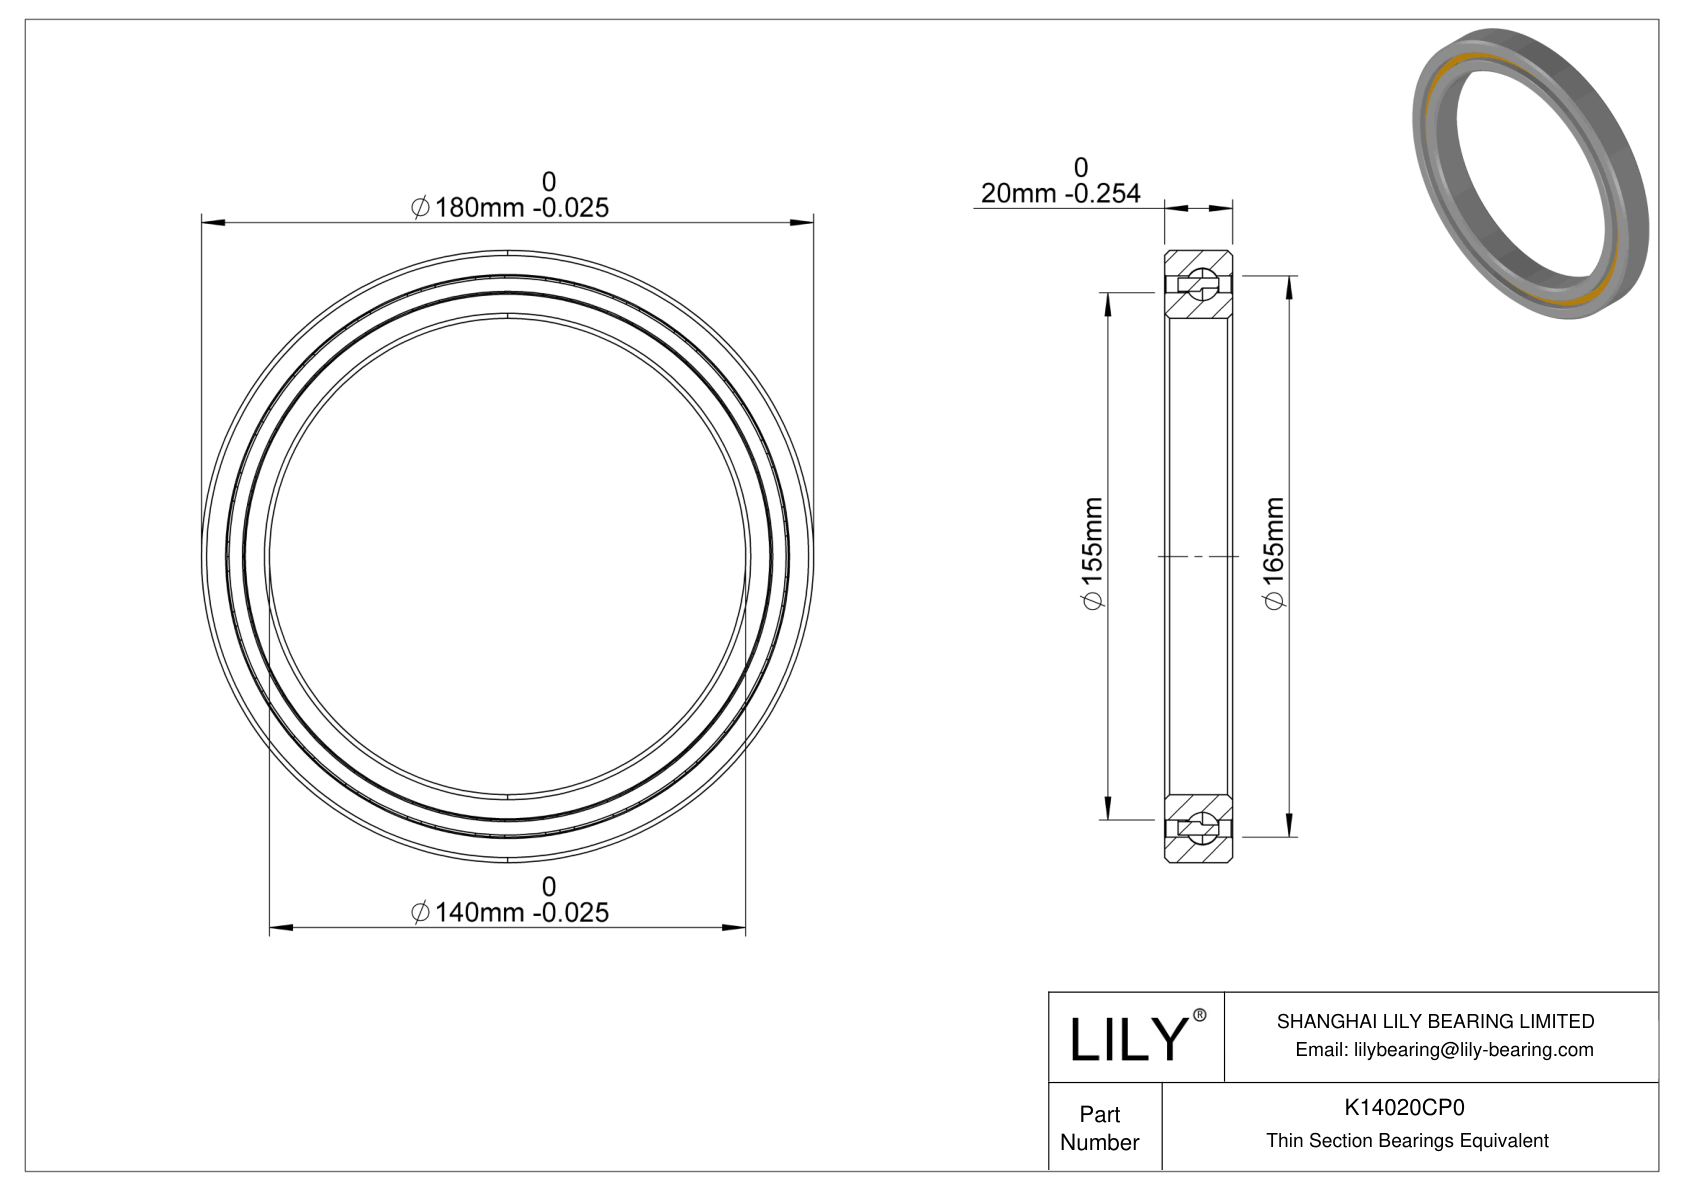 K14020CP0 Constant Section (CS) Bearings cad drawing